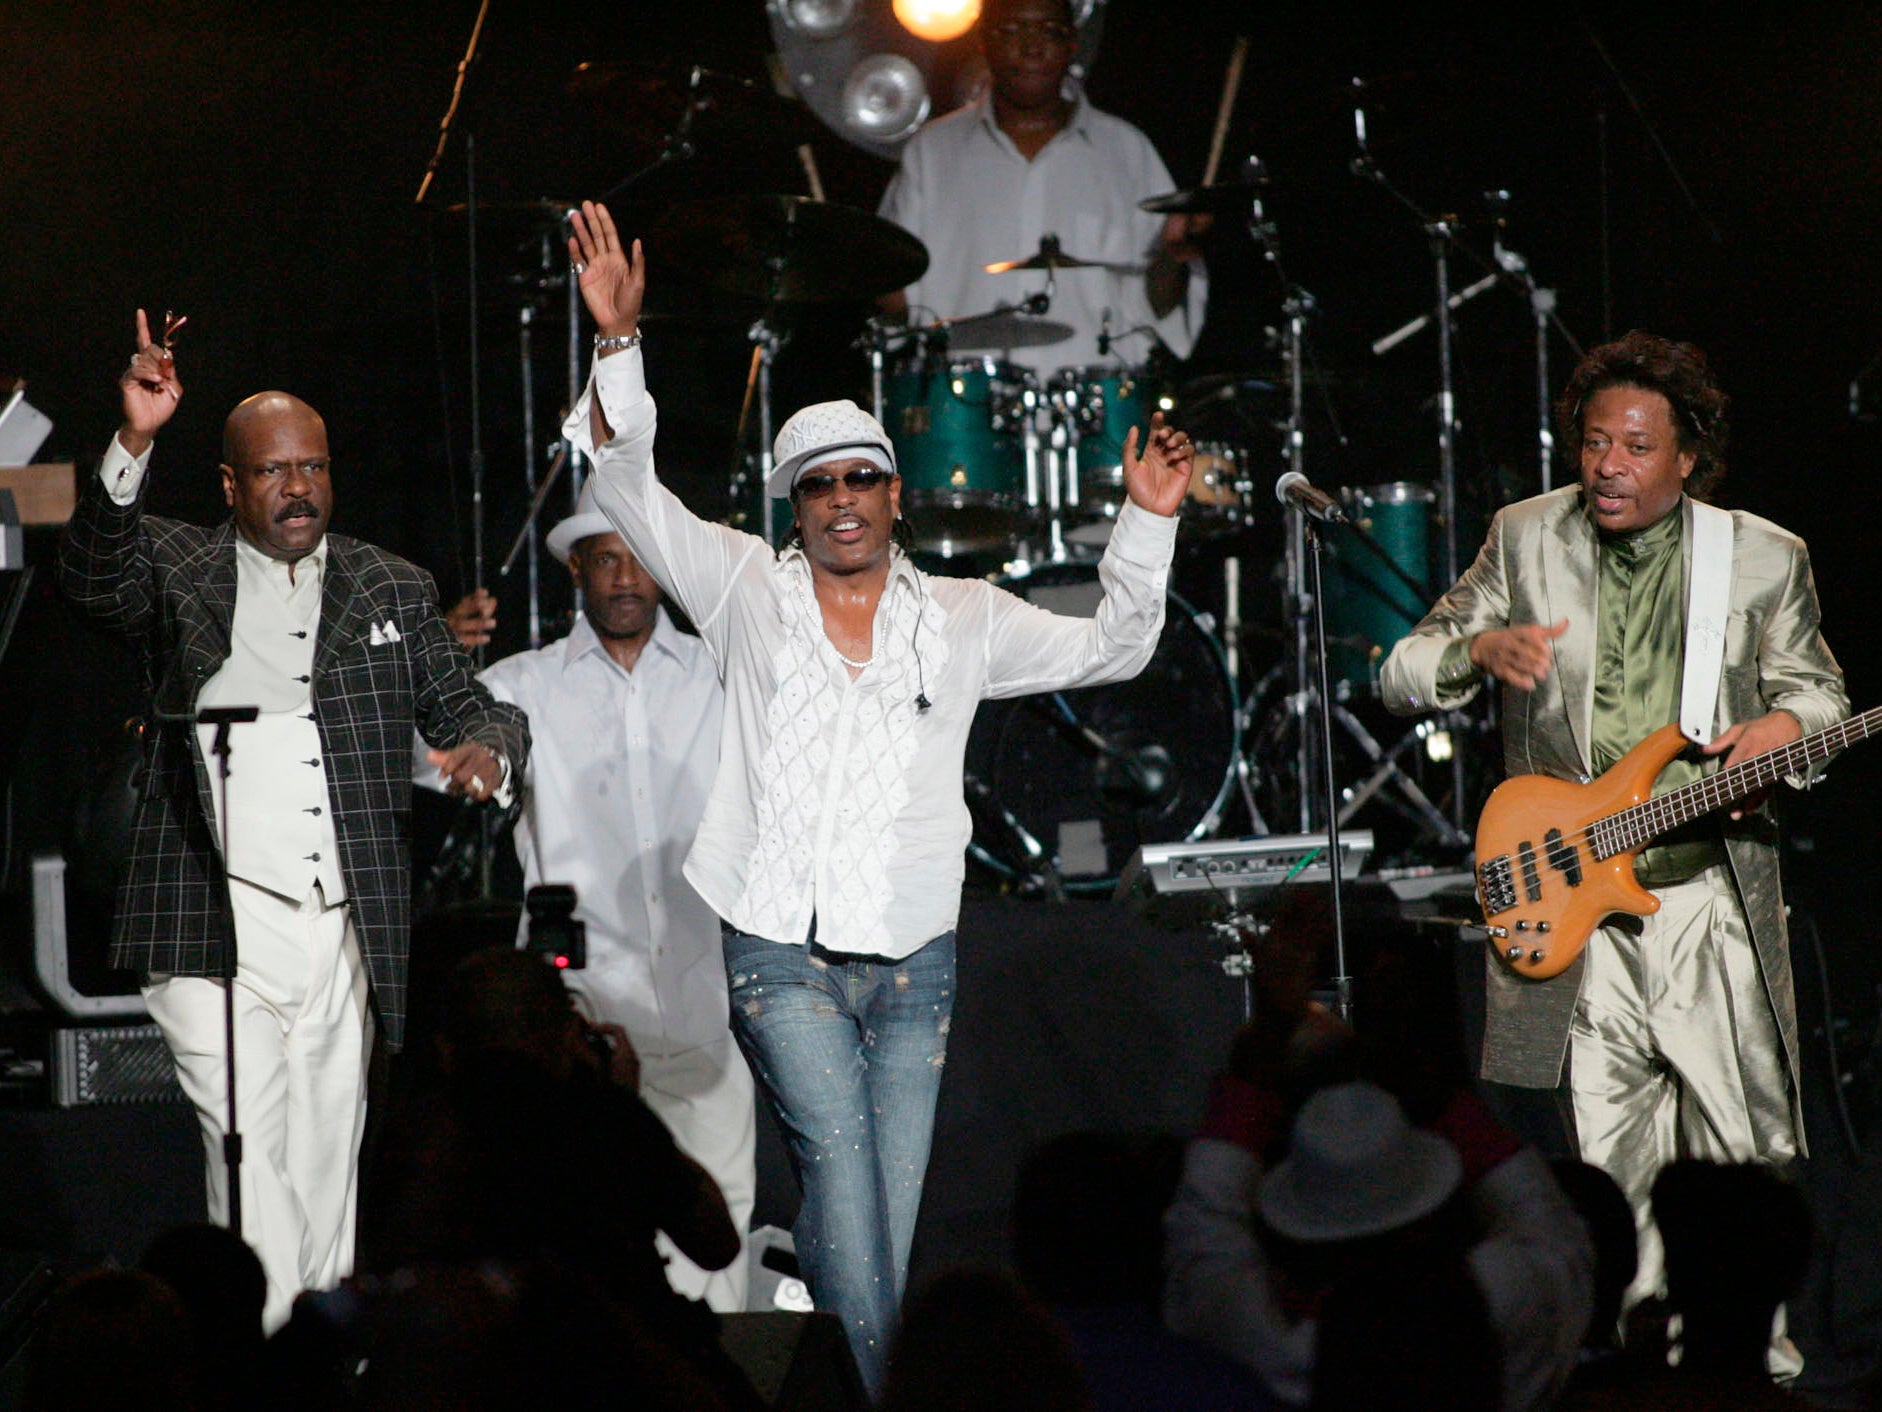 The Gap Band performing at the 2005 BMI Urban Music Awards in Miami Beach